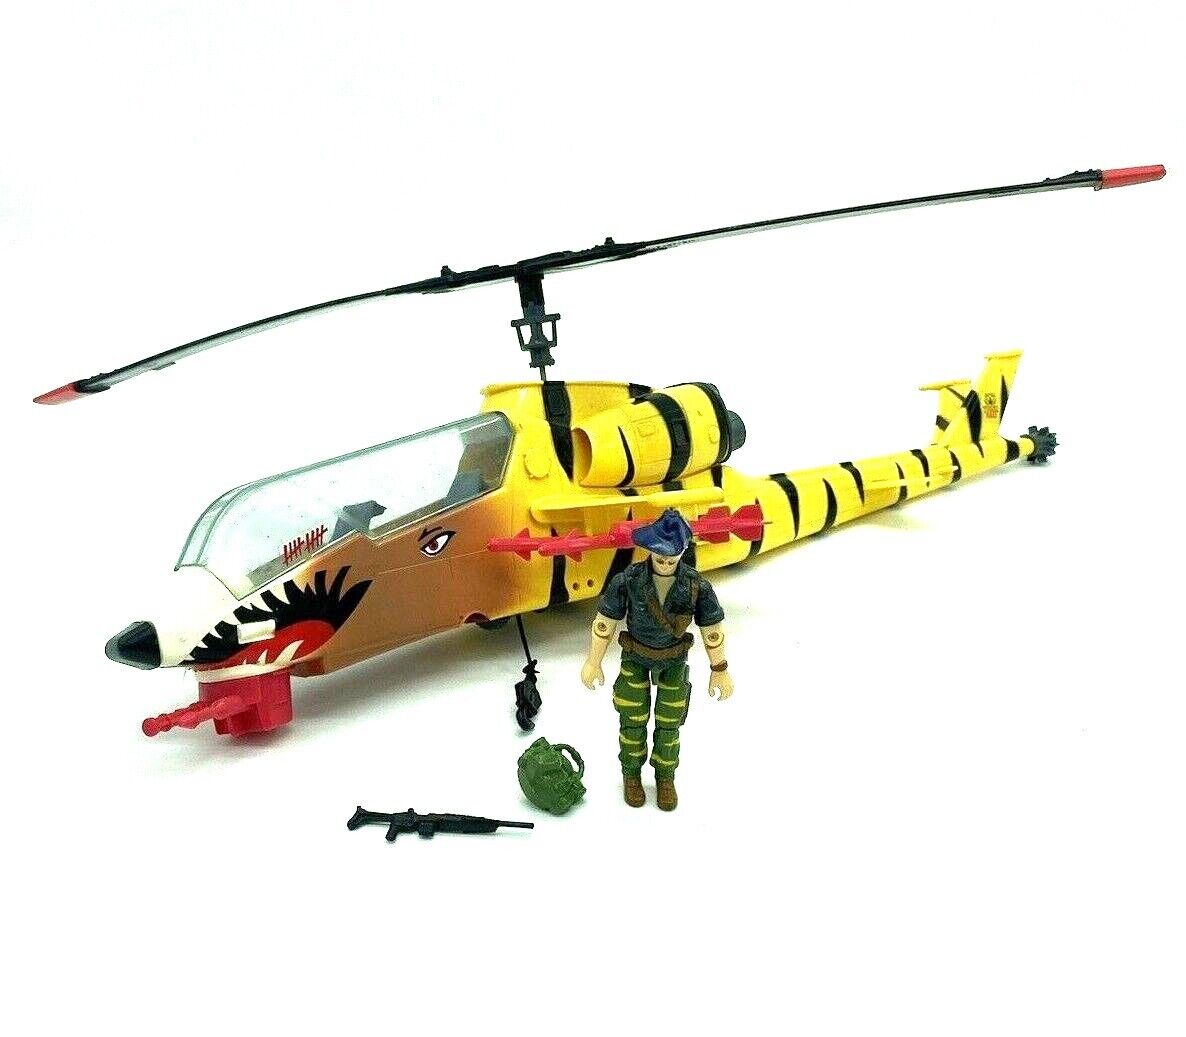 G.I. Joe Tigerfly Tiger Force helicopter with Recondo Tiger Fly